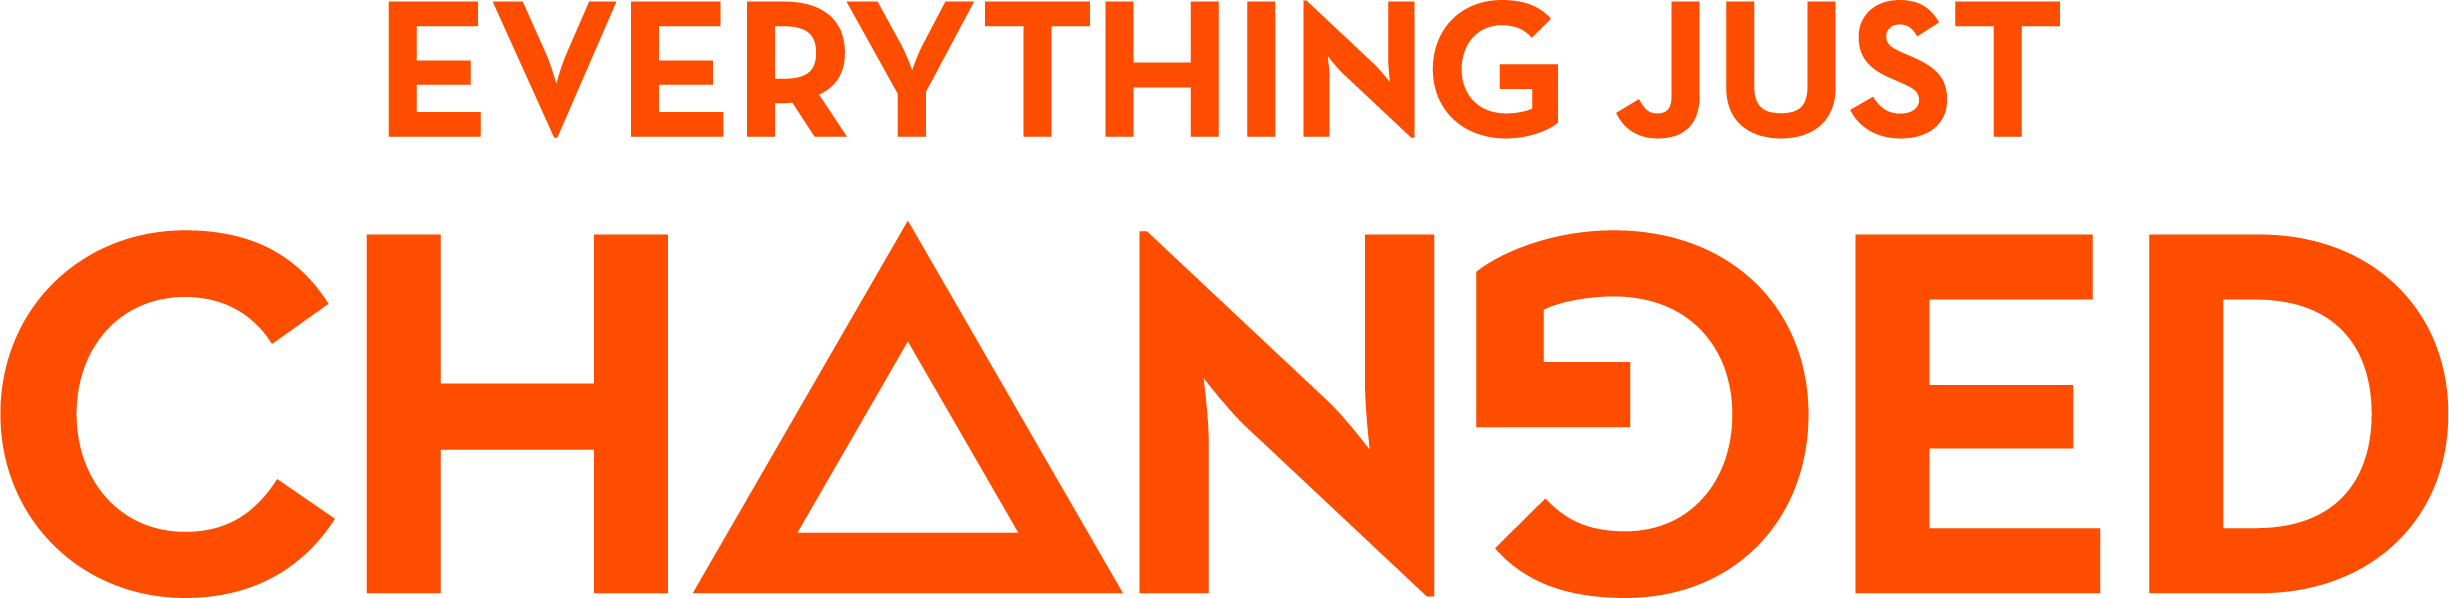 Everything Just Changed logo